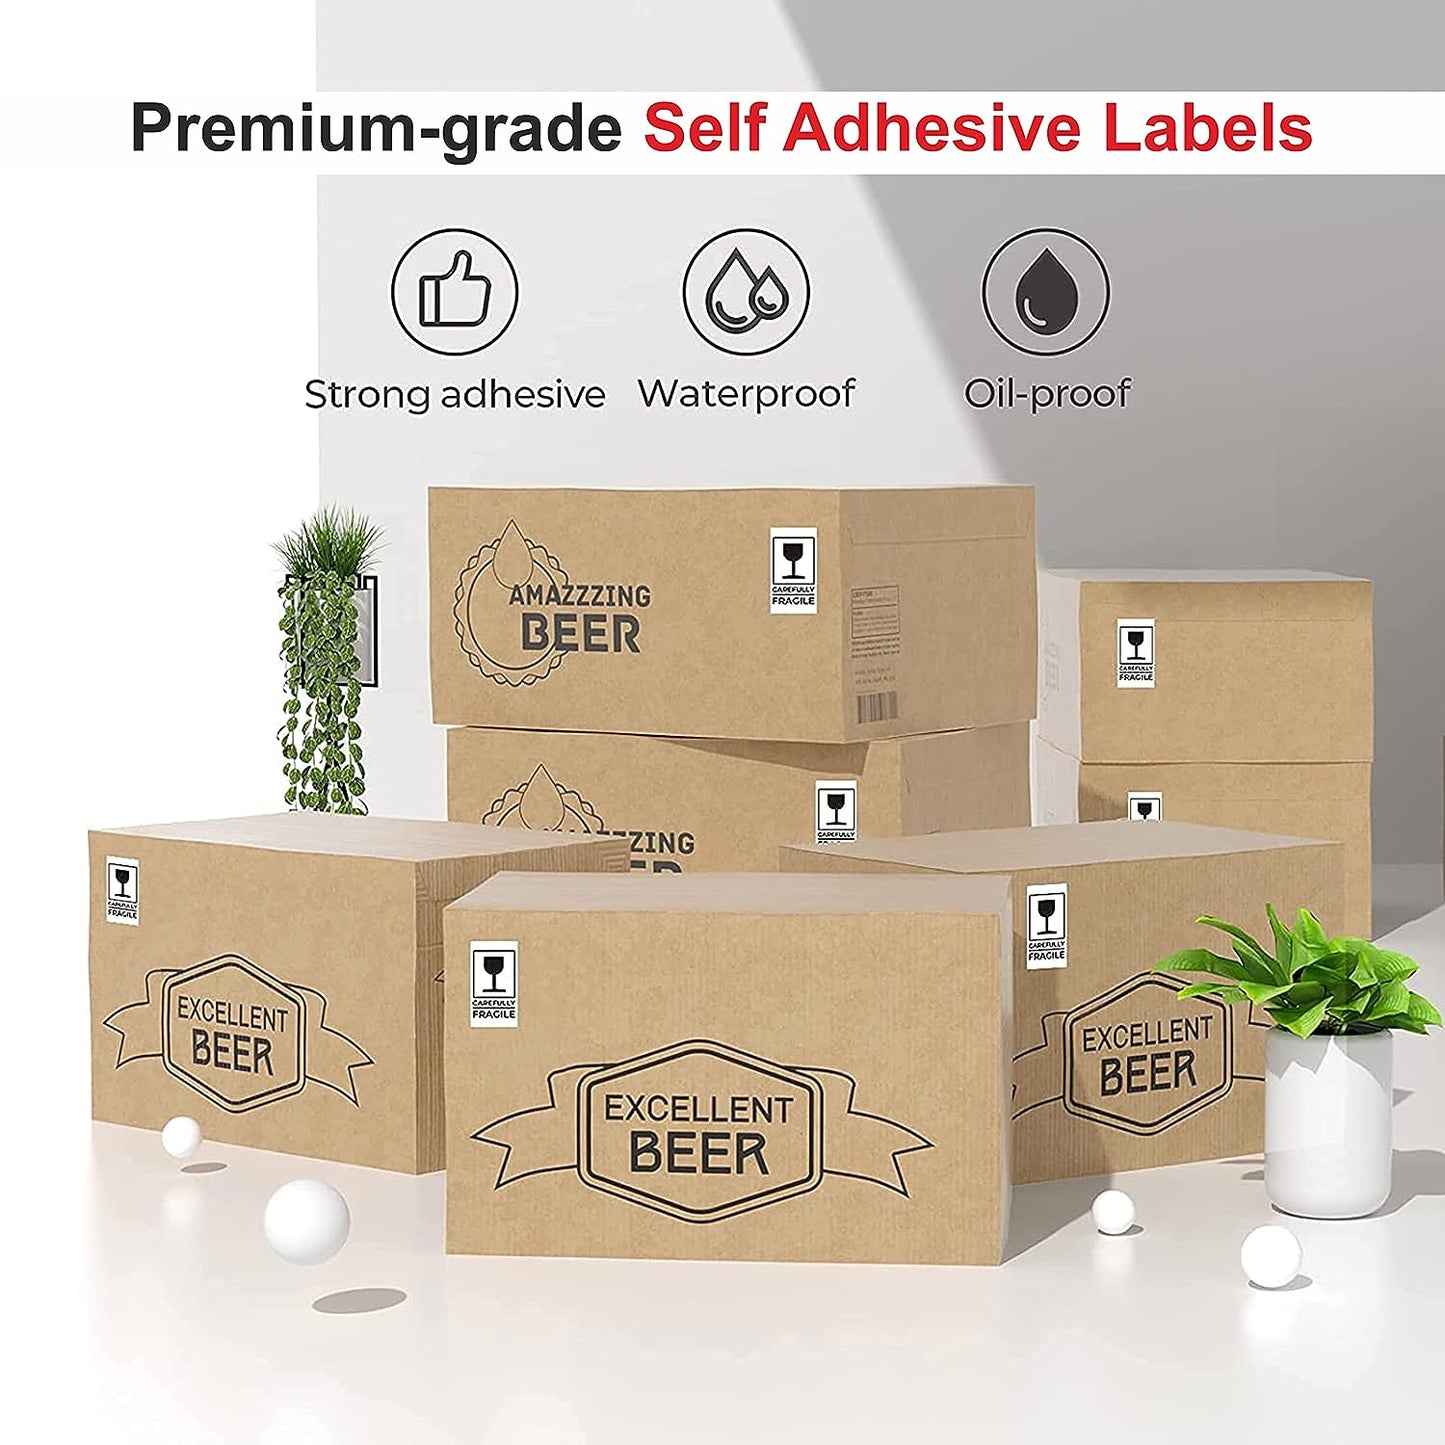 Oddy A4 Self Adhesive Paper Label Stickers (Laser & Inkjet Printers) - 16 Labels per Sheet - Pack of 100 Sheets, for Shipping, Address, Folders, Industrial use